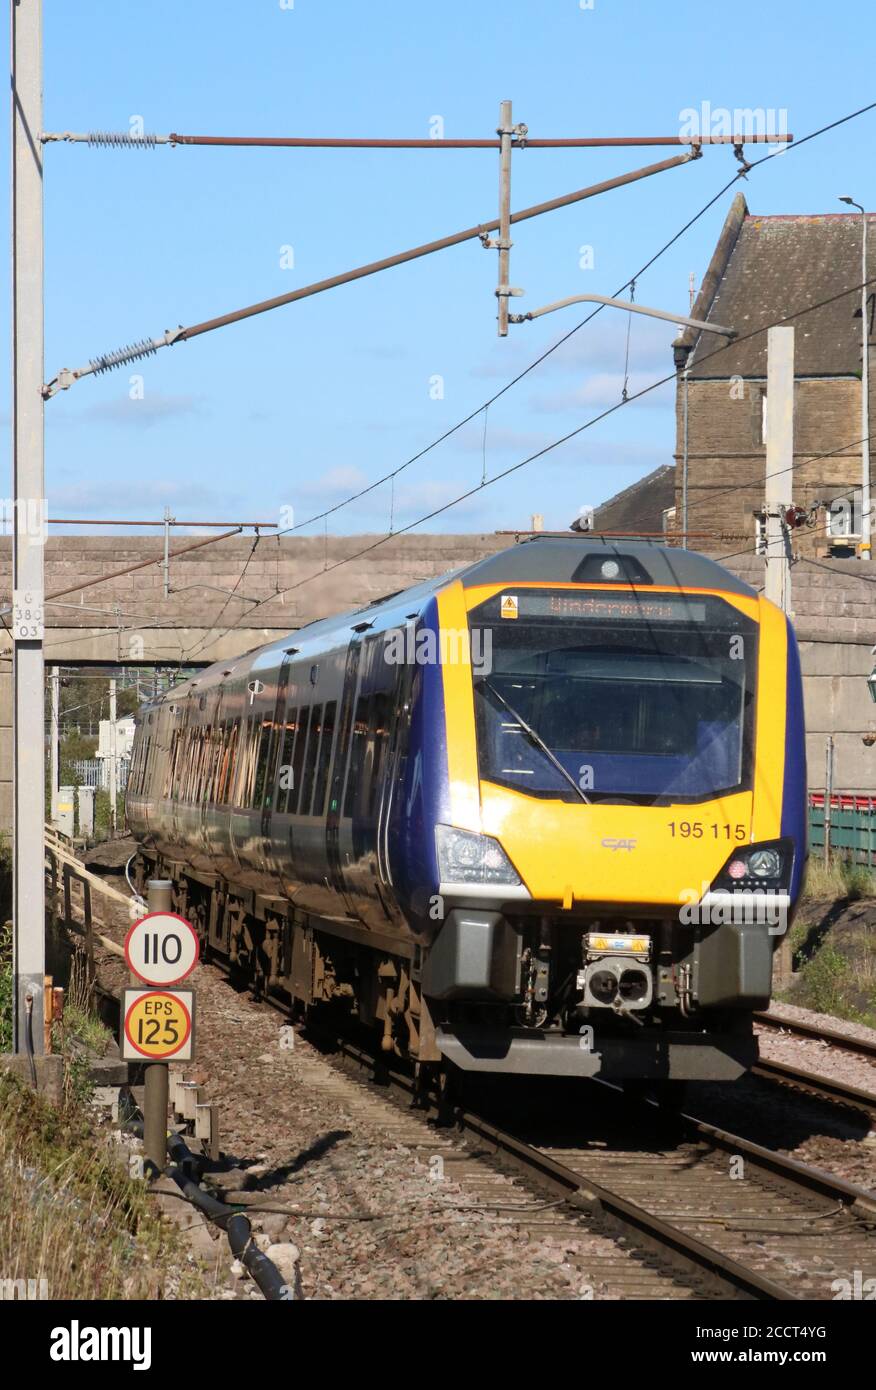 Class 195 CAF Civity dmu, unit number 195115, operated by Northern trains passing through Carnforth on the WCML railway on Monday 24th August 2020. Stock Photo